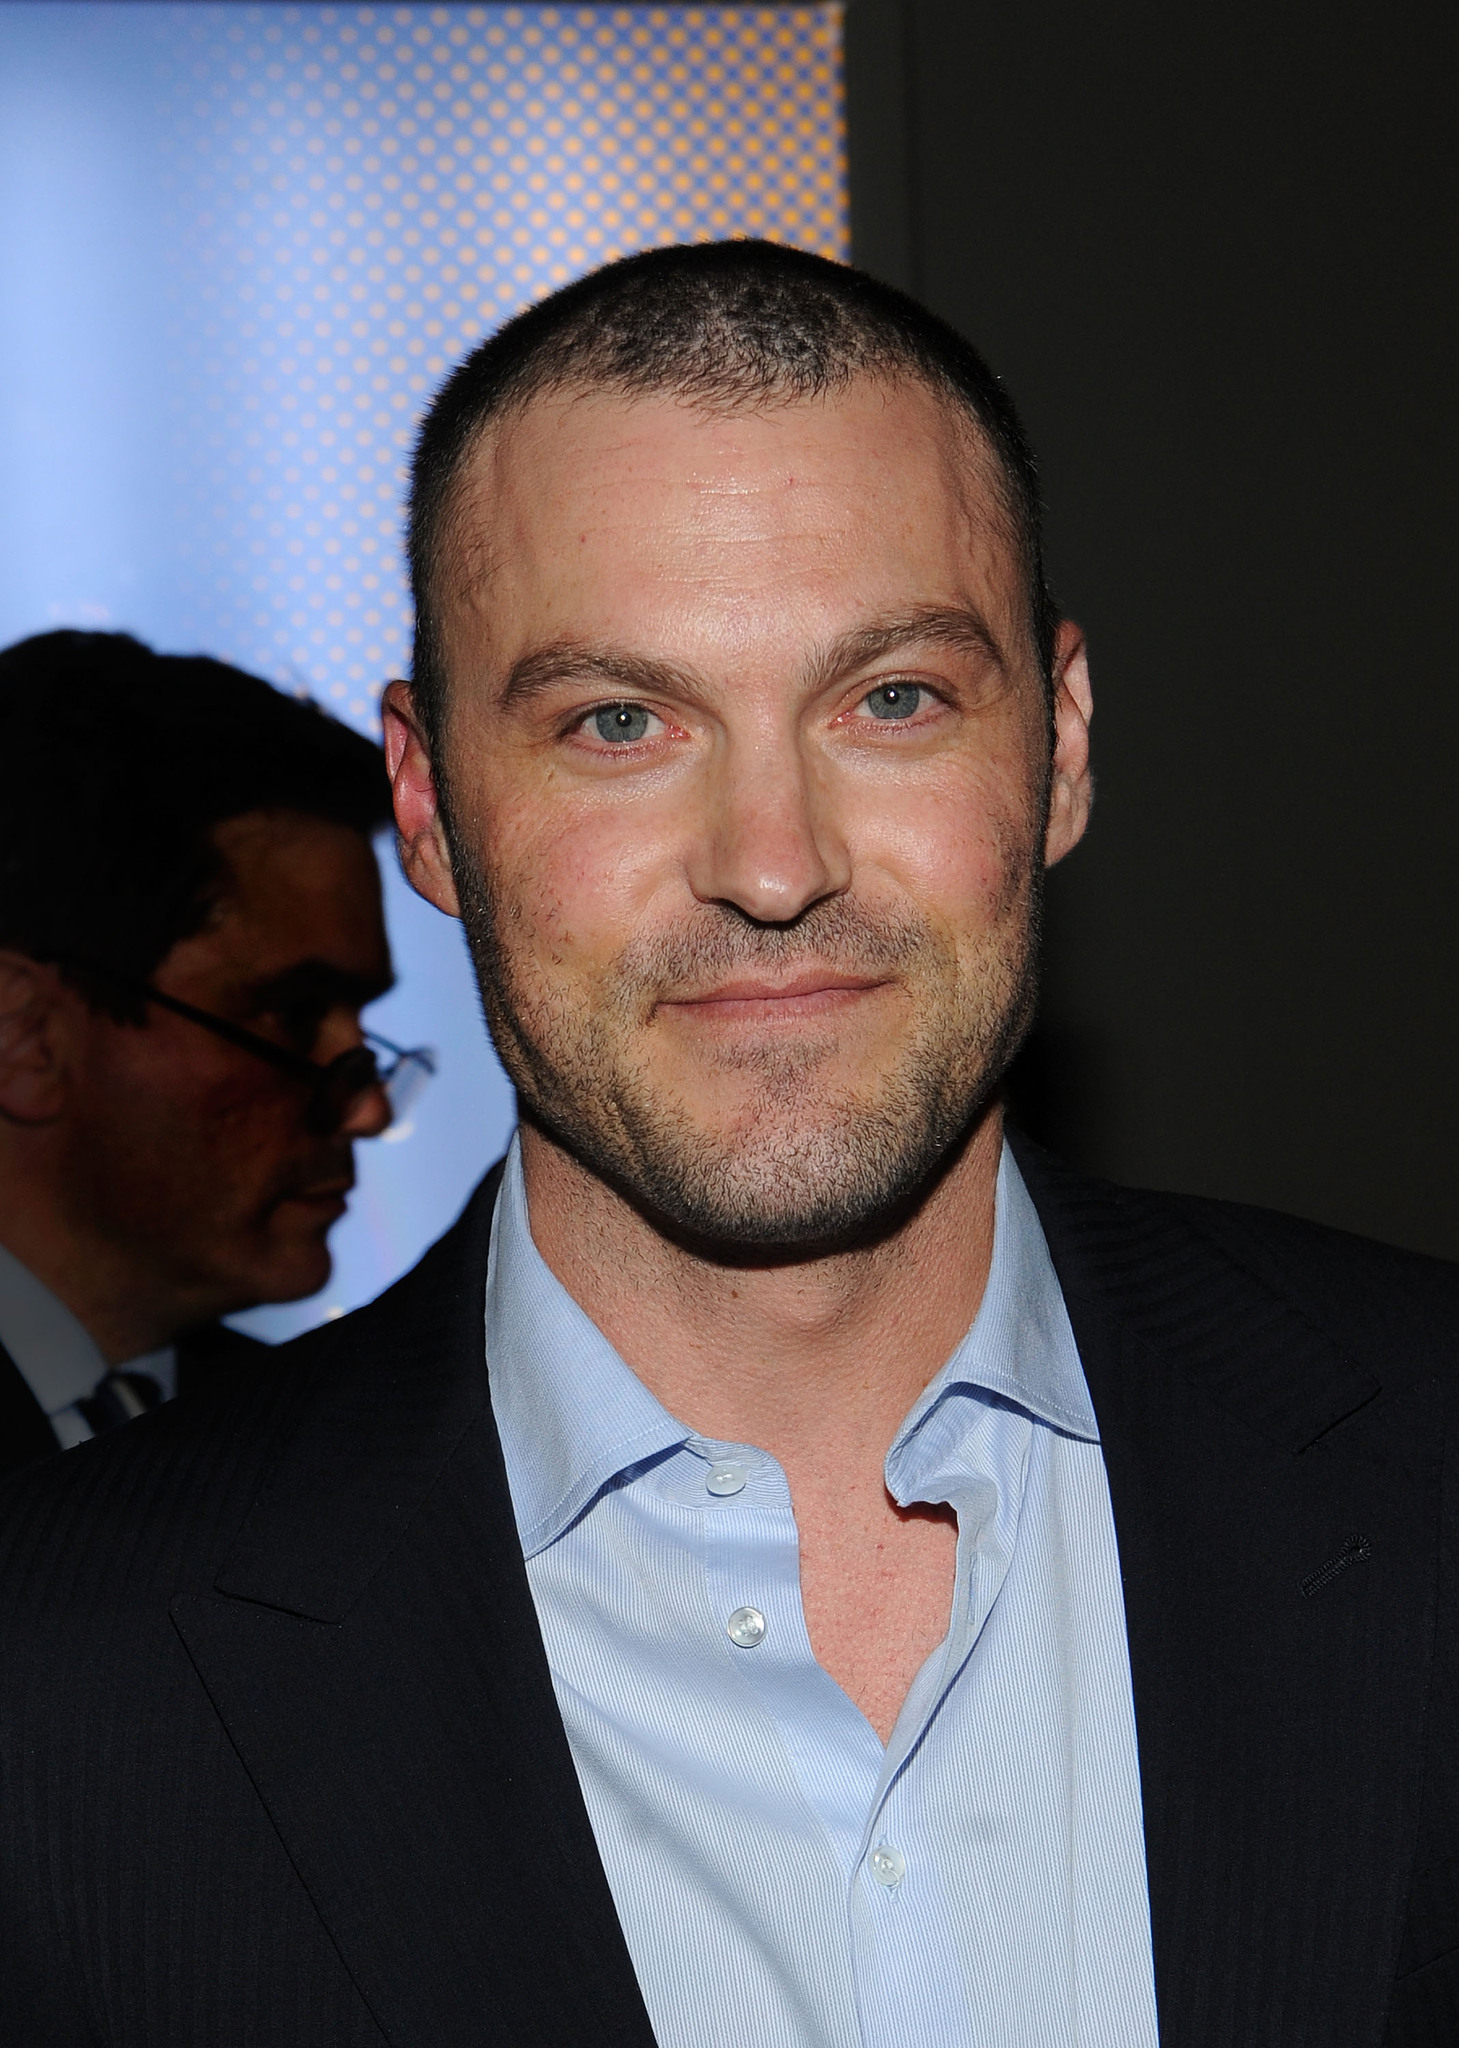 Brian Austin Green at event of Friends with Kids (2011)